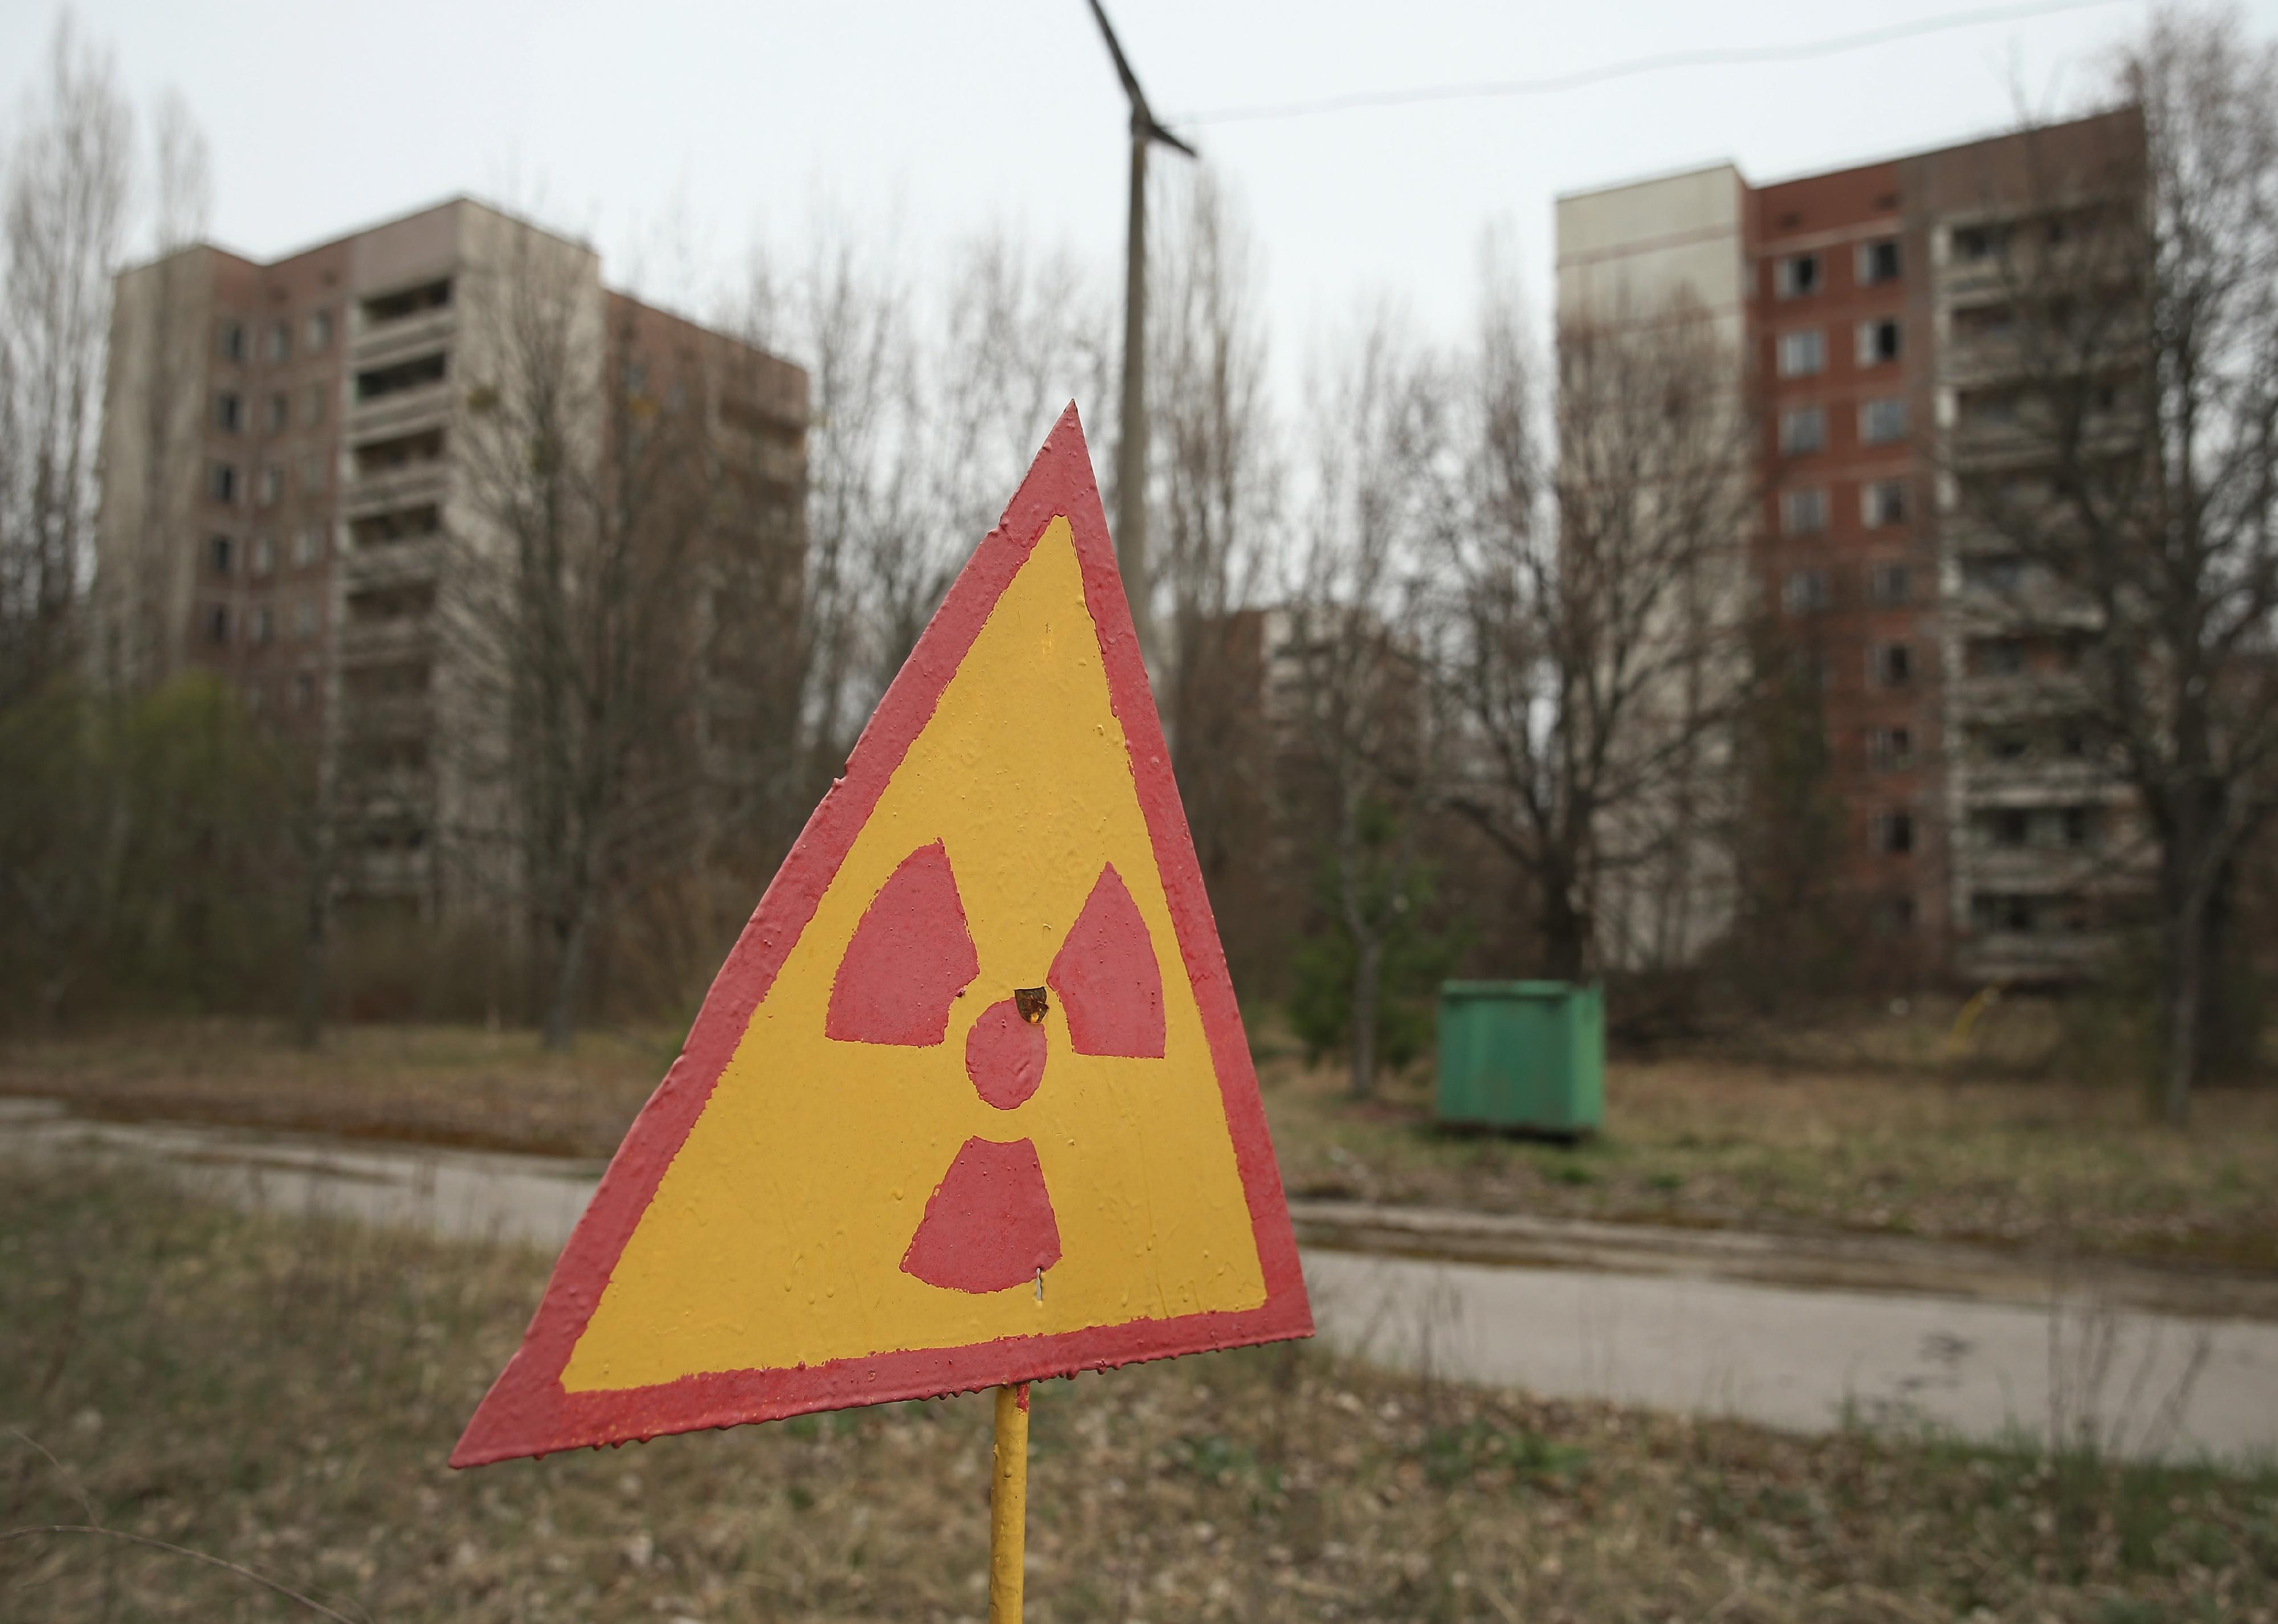 A sign warns of radiation contamination near former apartment buildings.